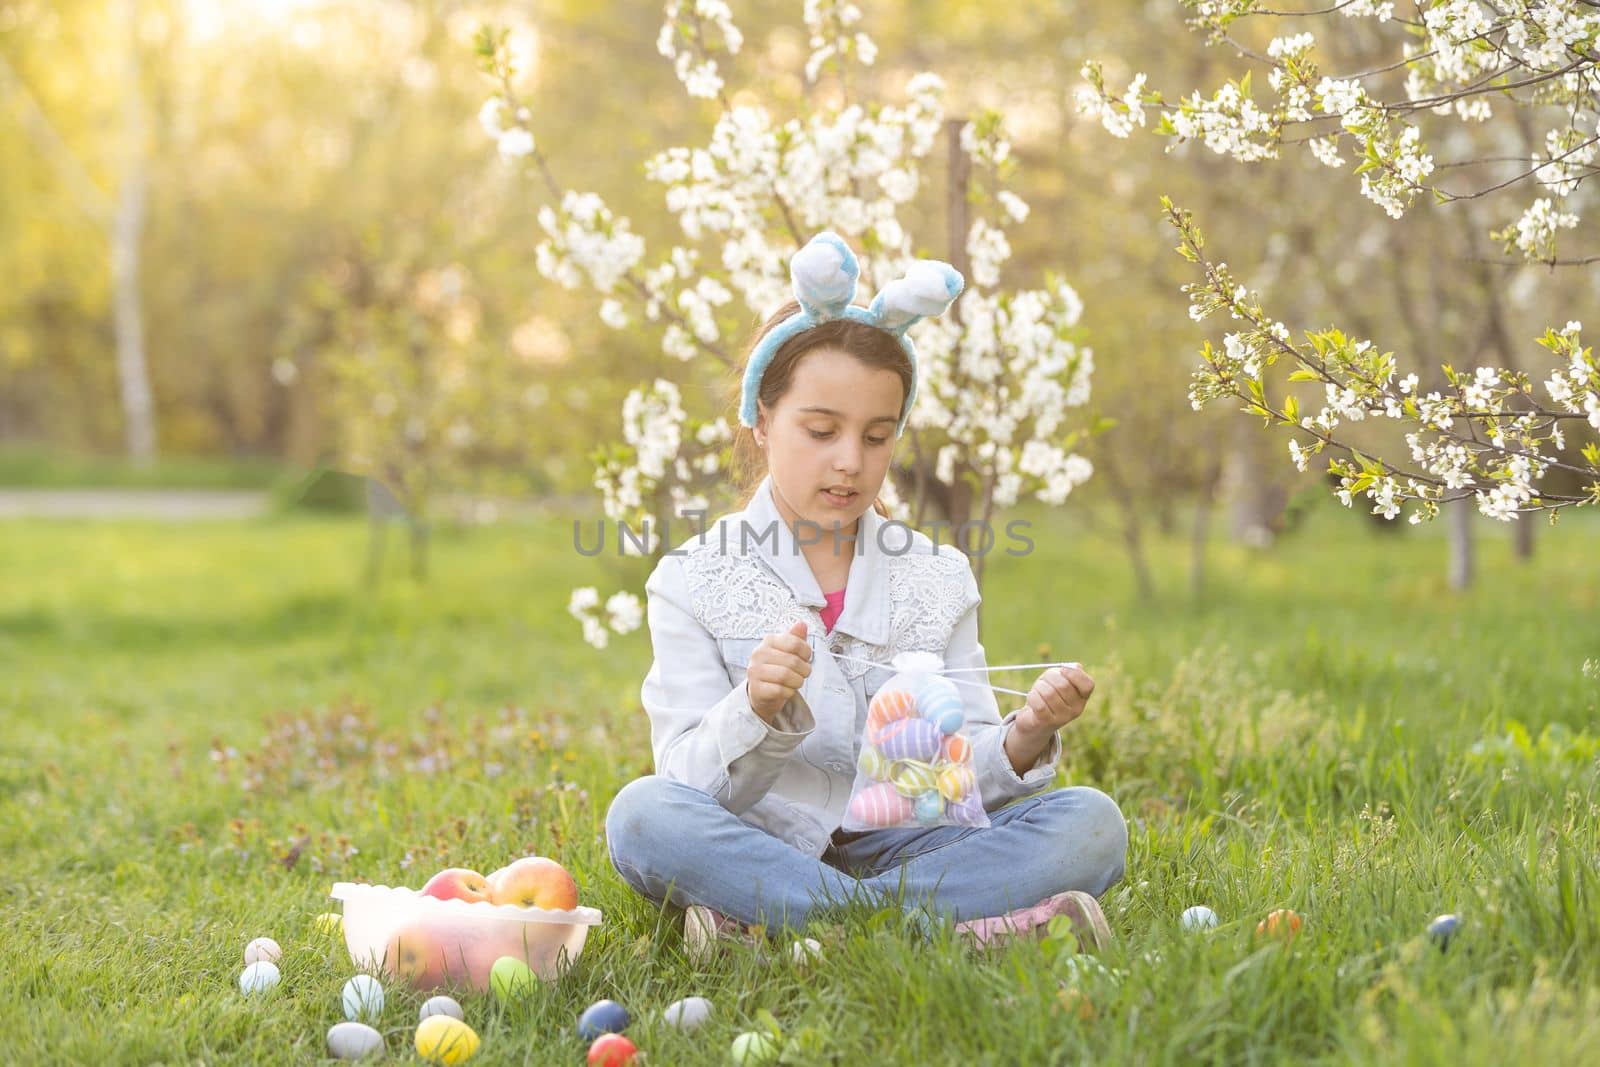 Adorable little girl in bunny ears, blooming tree branch outdoors on a spring day. Kid having fun on Easter egg hunt in the garden.